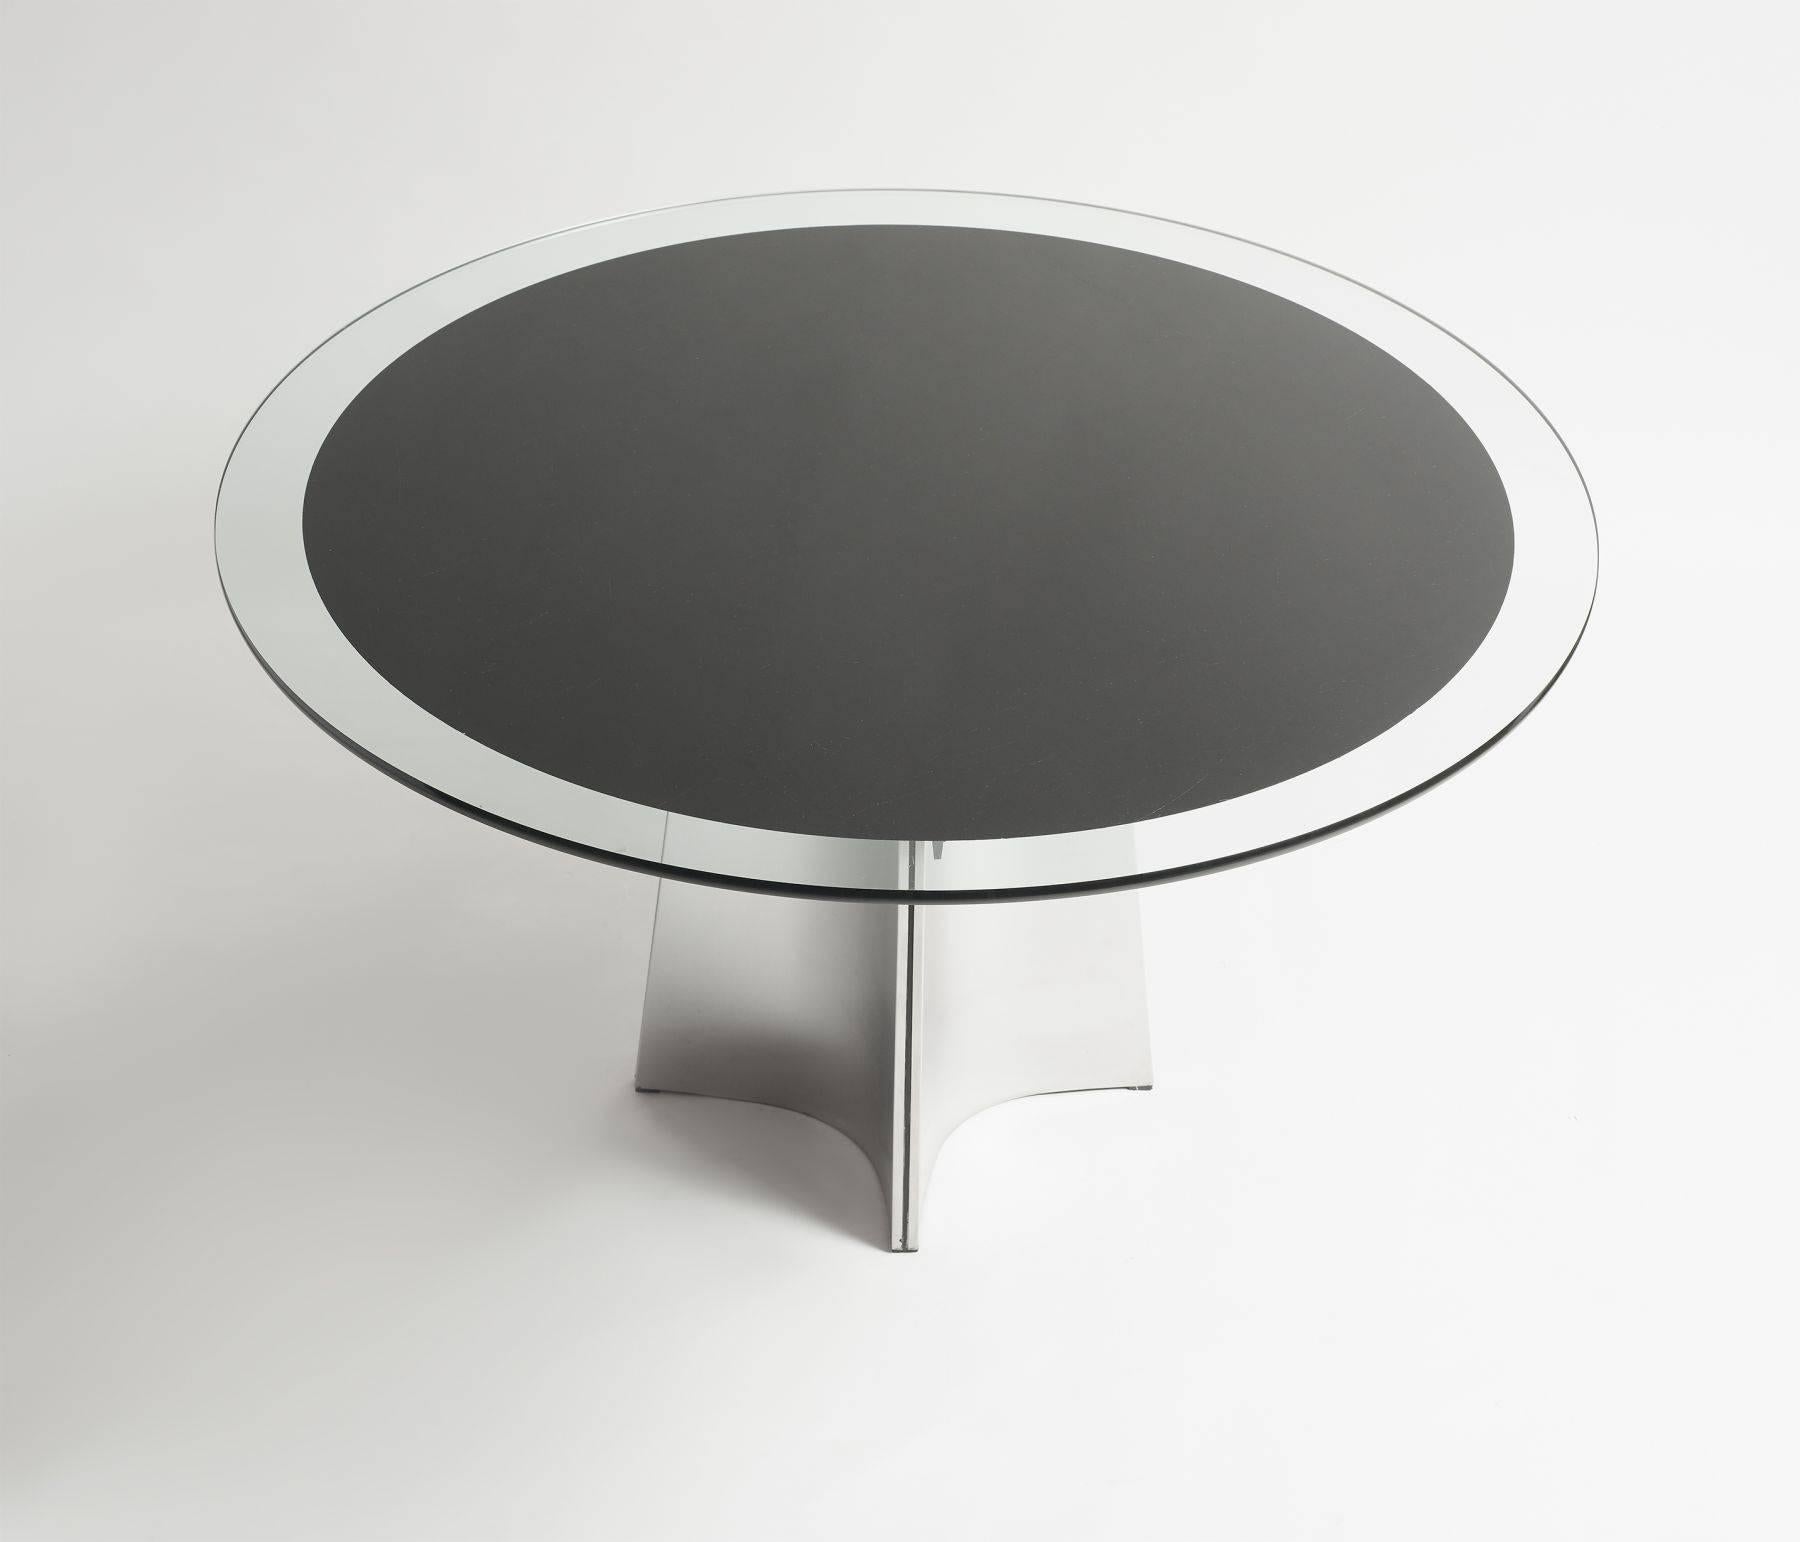 A center table by Louis Saccardo for Maison Jansen.